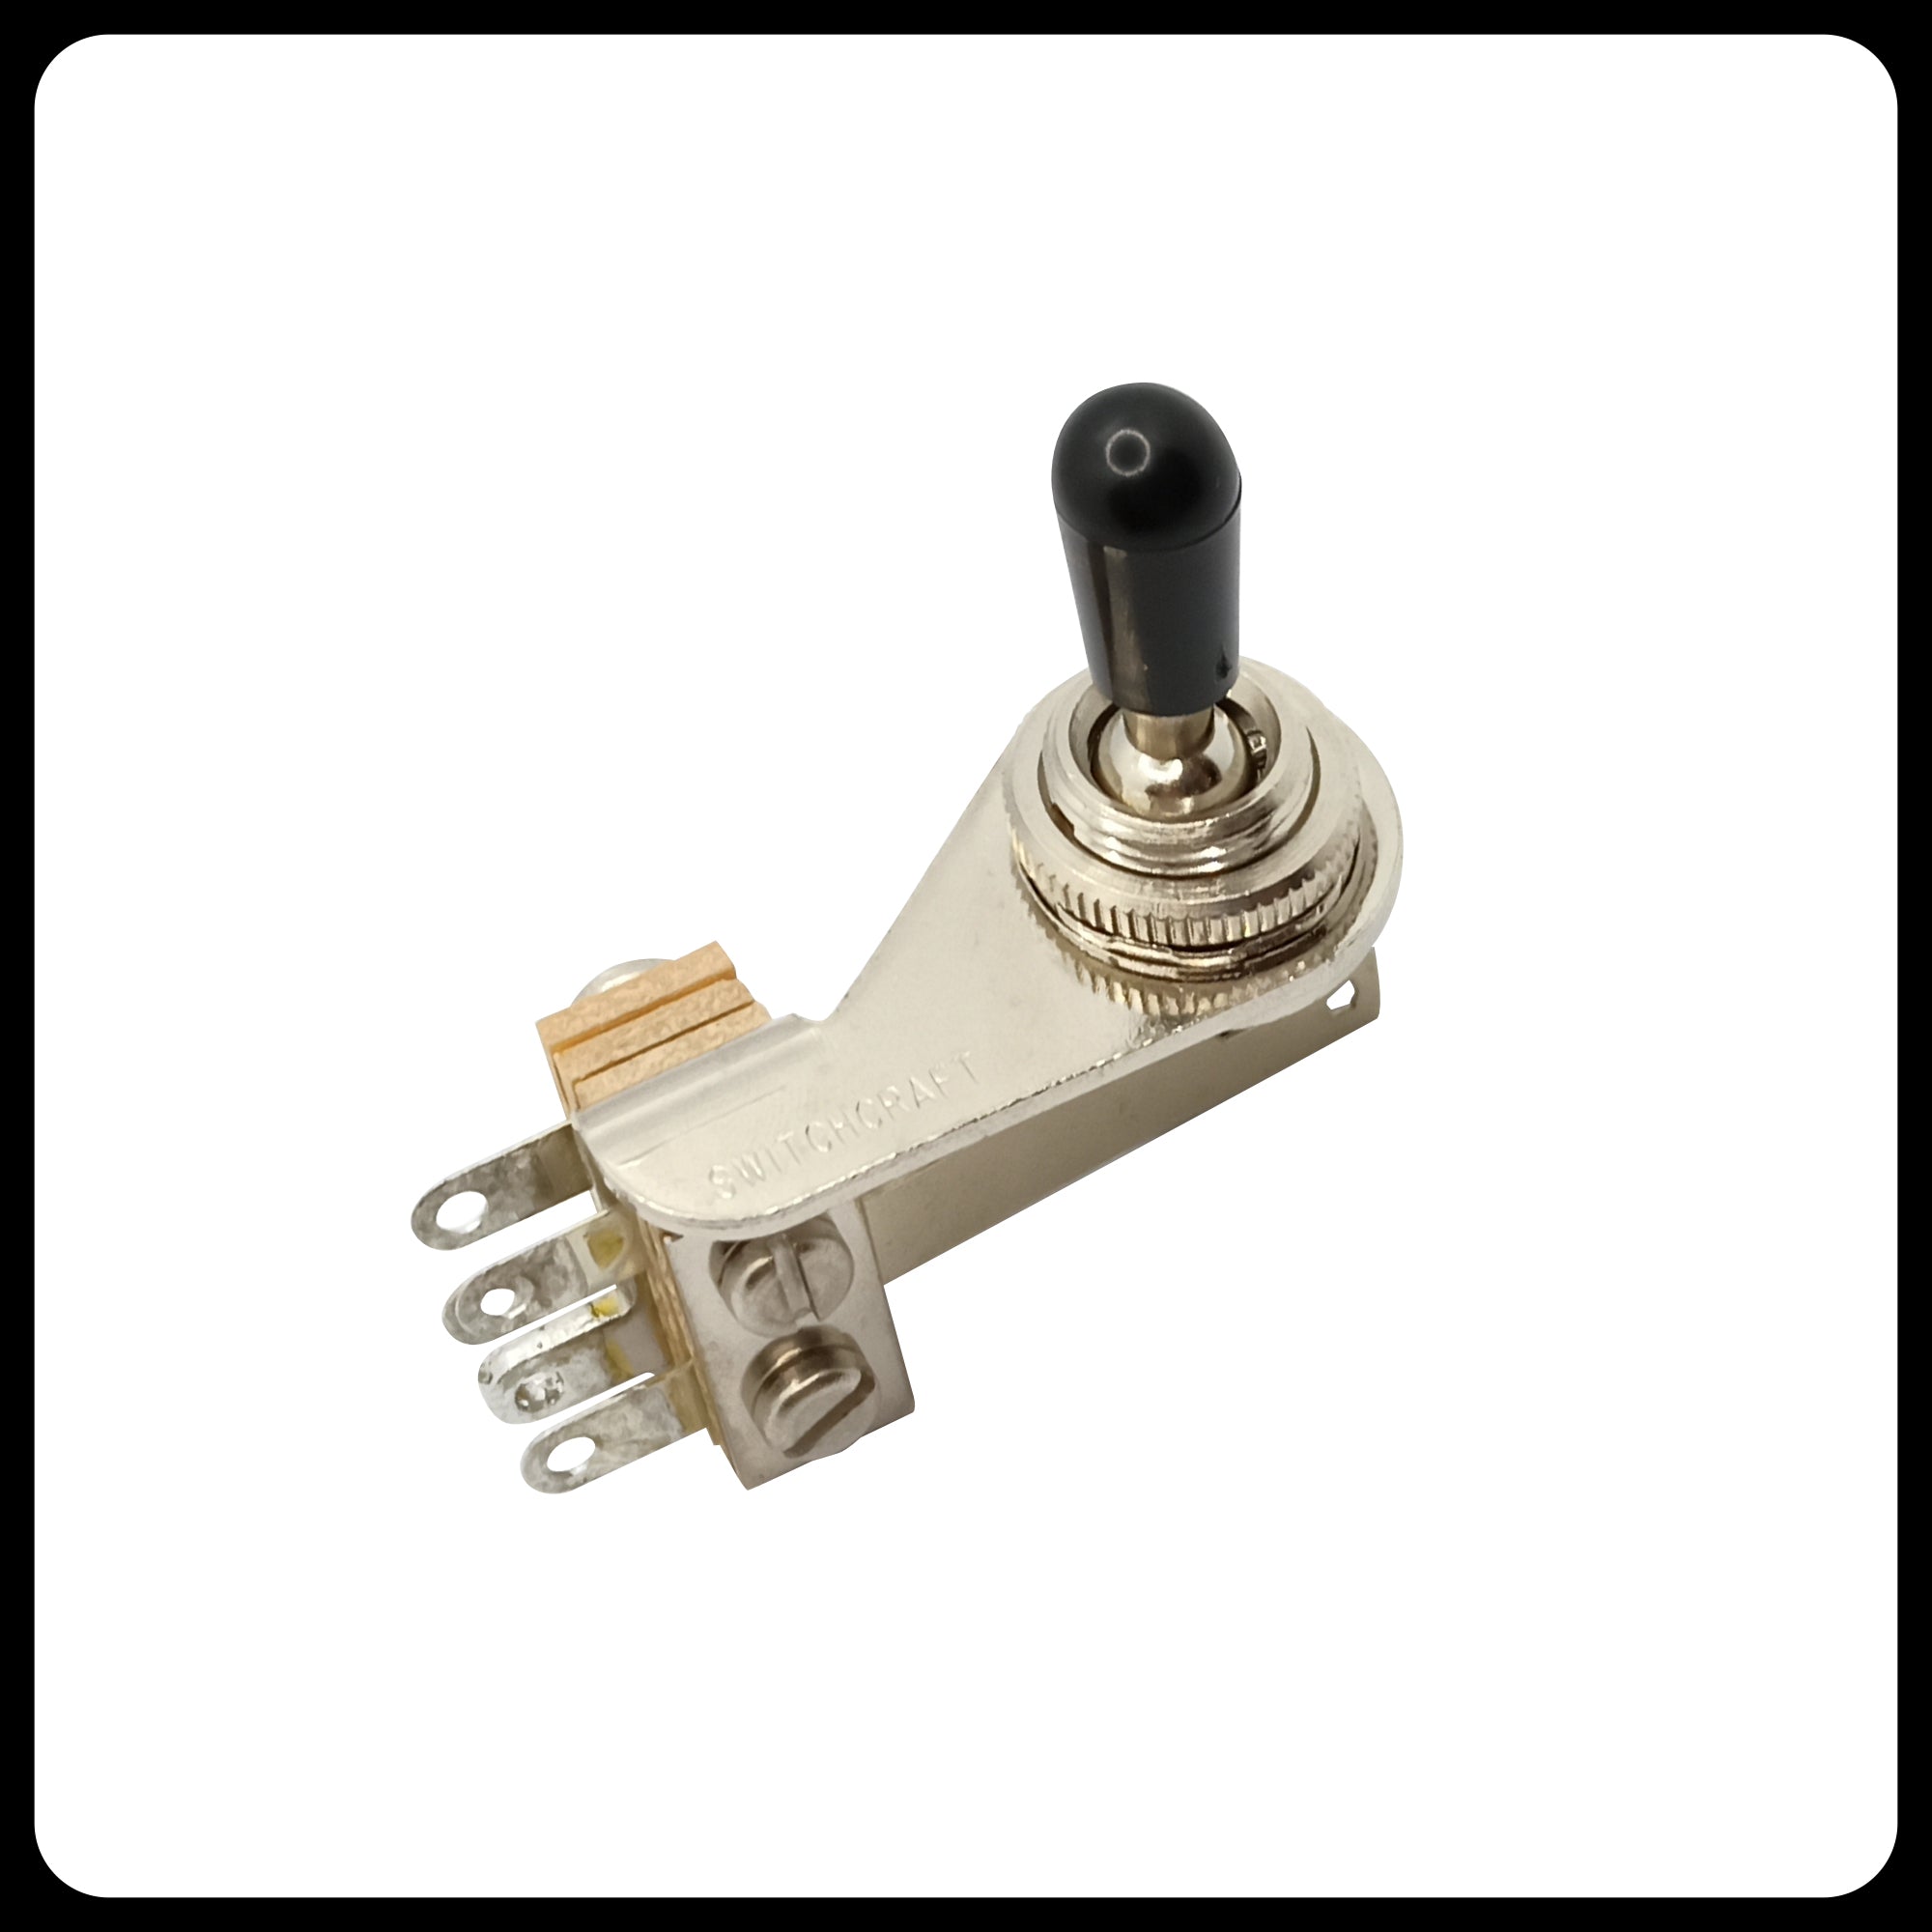 Switchcraft® 3-way Toggle Switch Made in USA